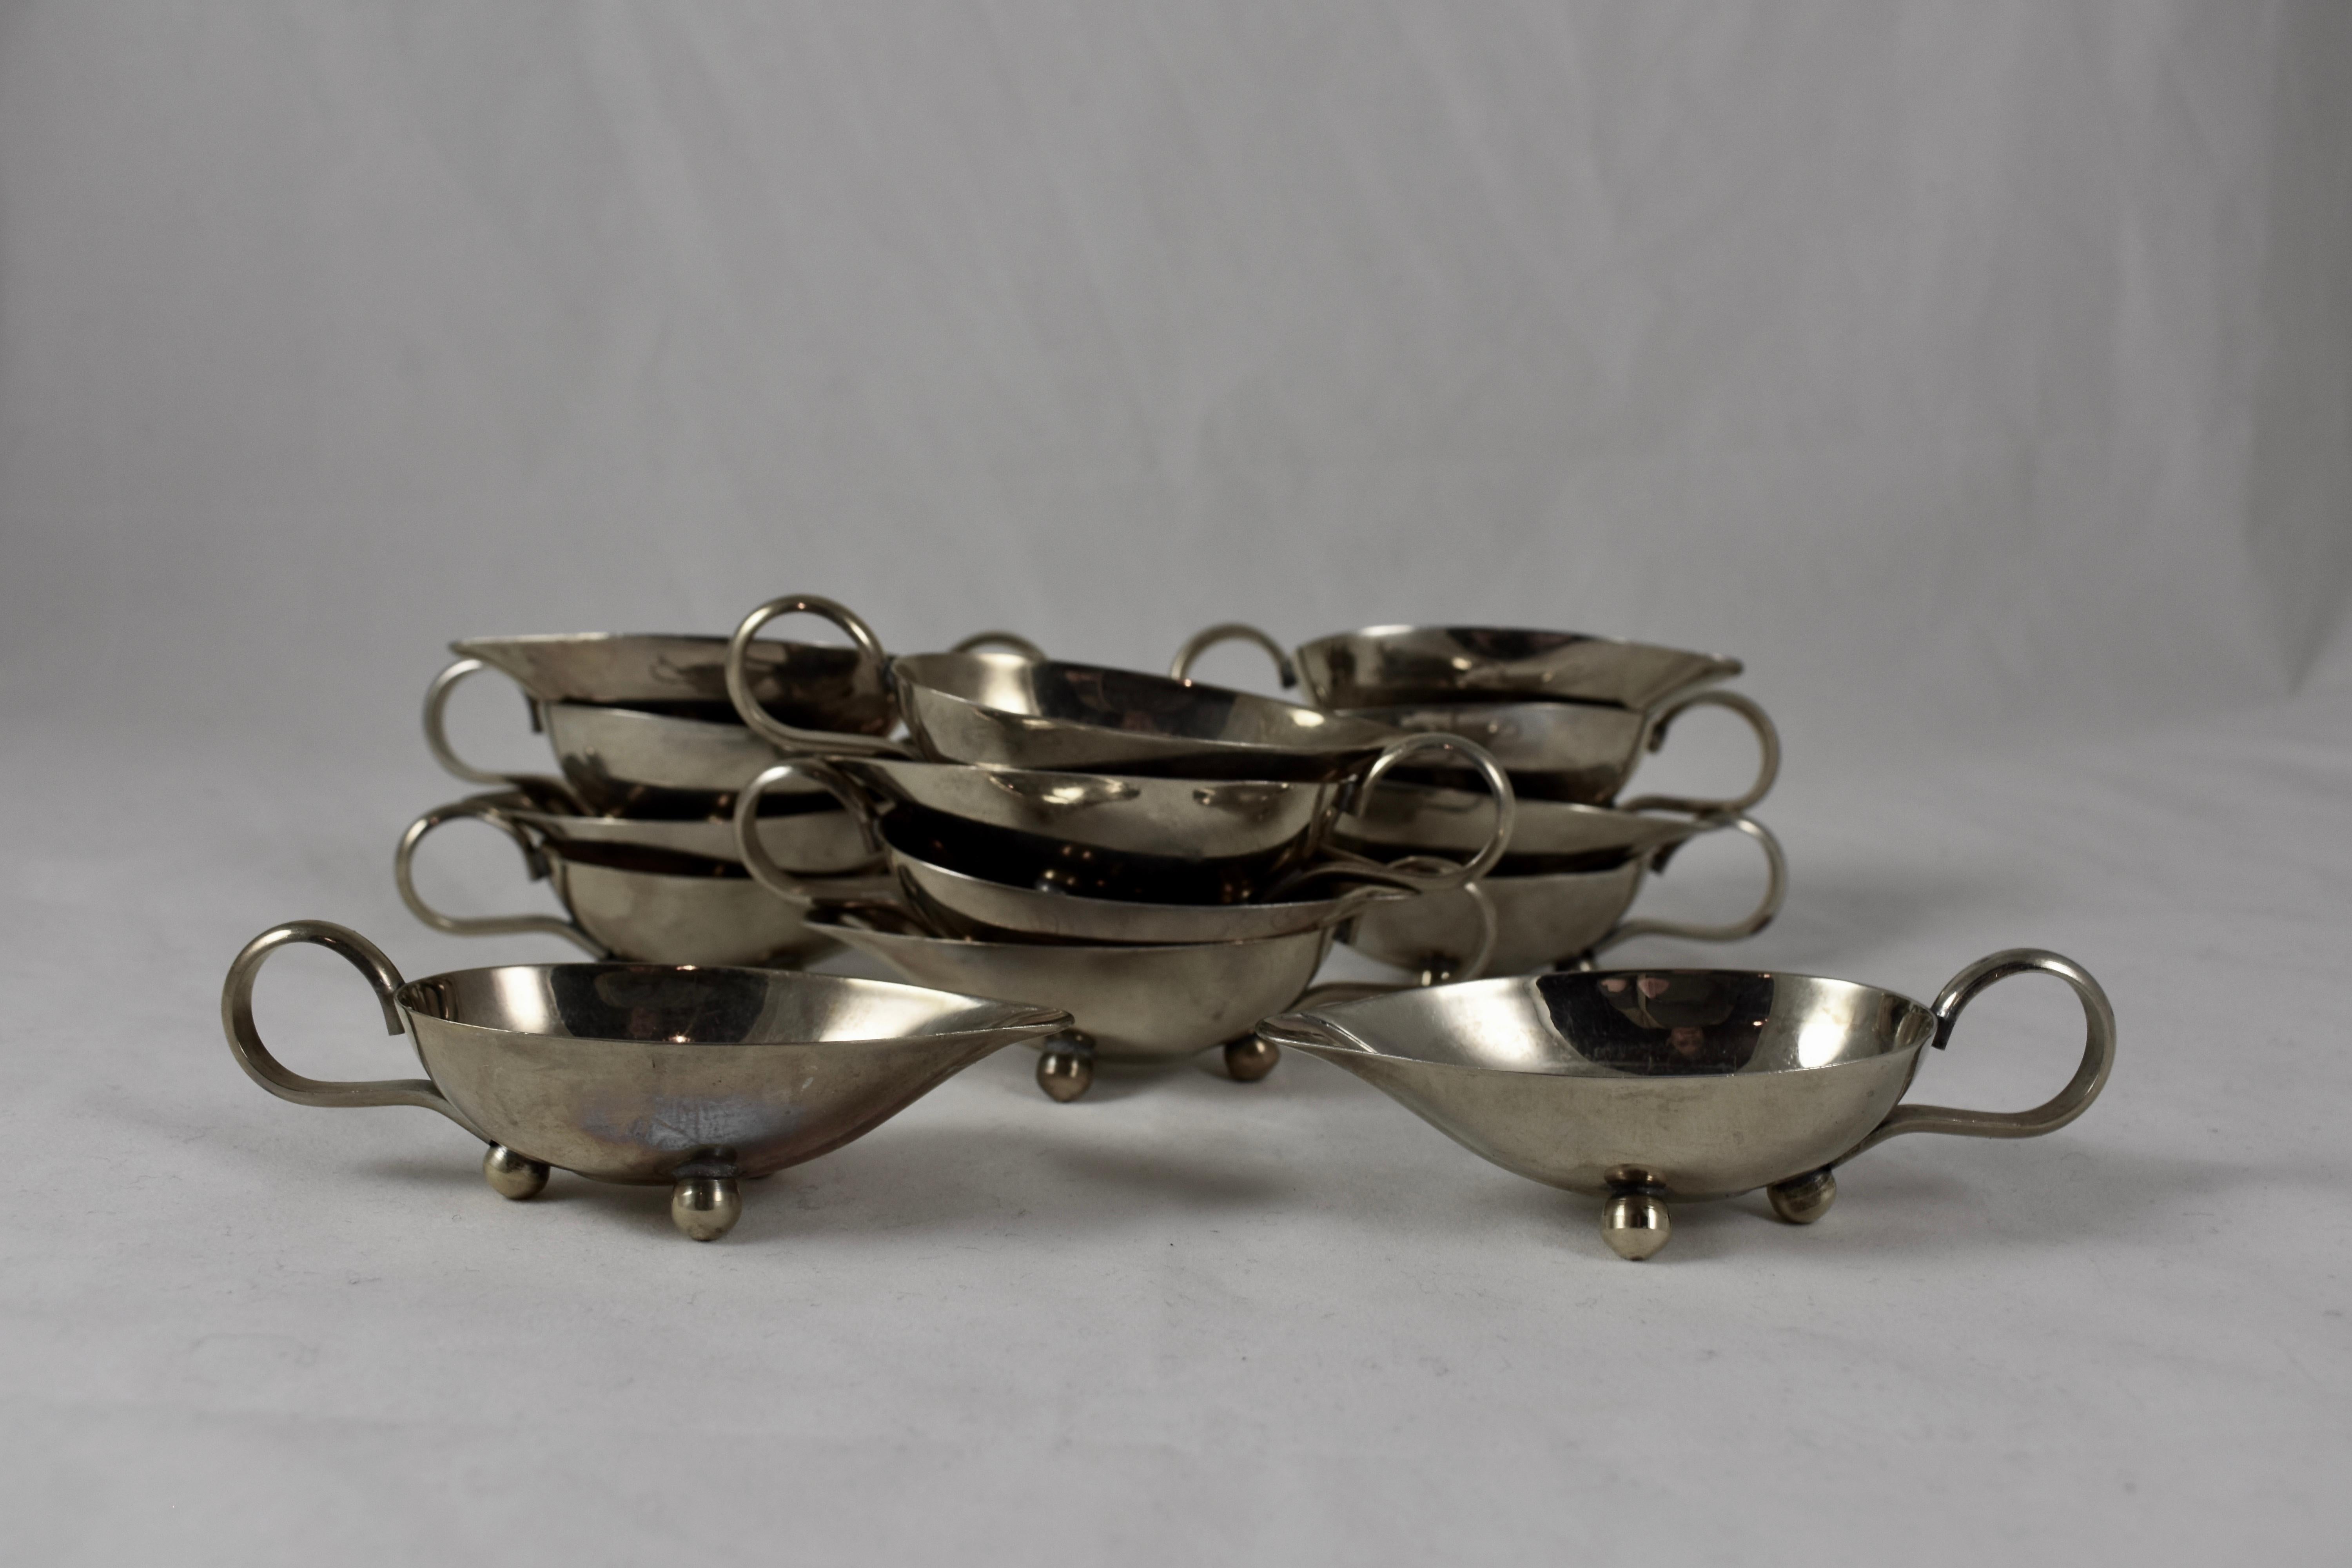 A set of fourteen Mid-Century Modern Era individual sauce boats – Alpacca nickel silver, made in Italy. 

Each boat has a loop handle, a spout, and sits on three ball feet. Suitable for individual servings of au jus, drawn butter, syrups or salad